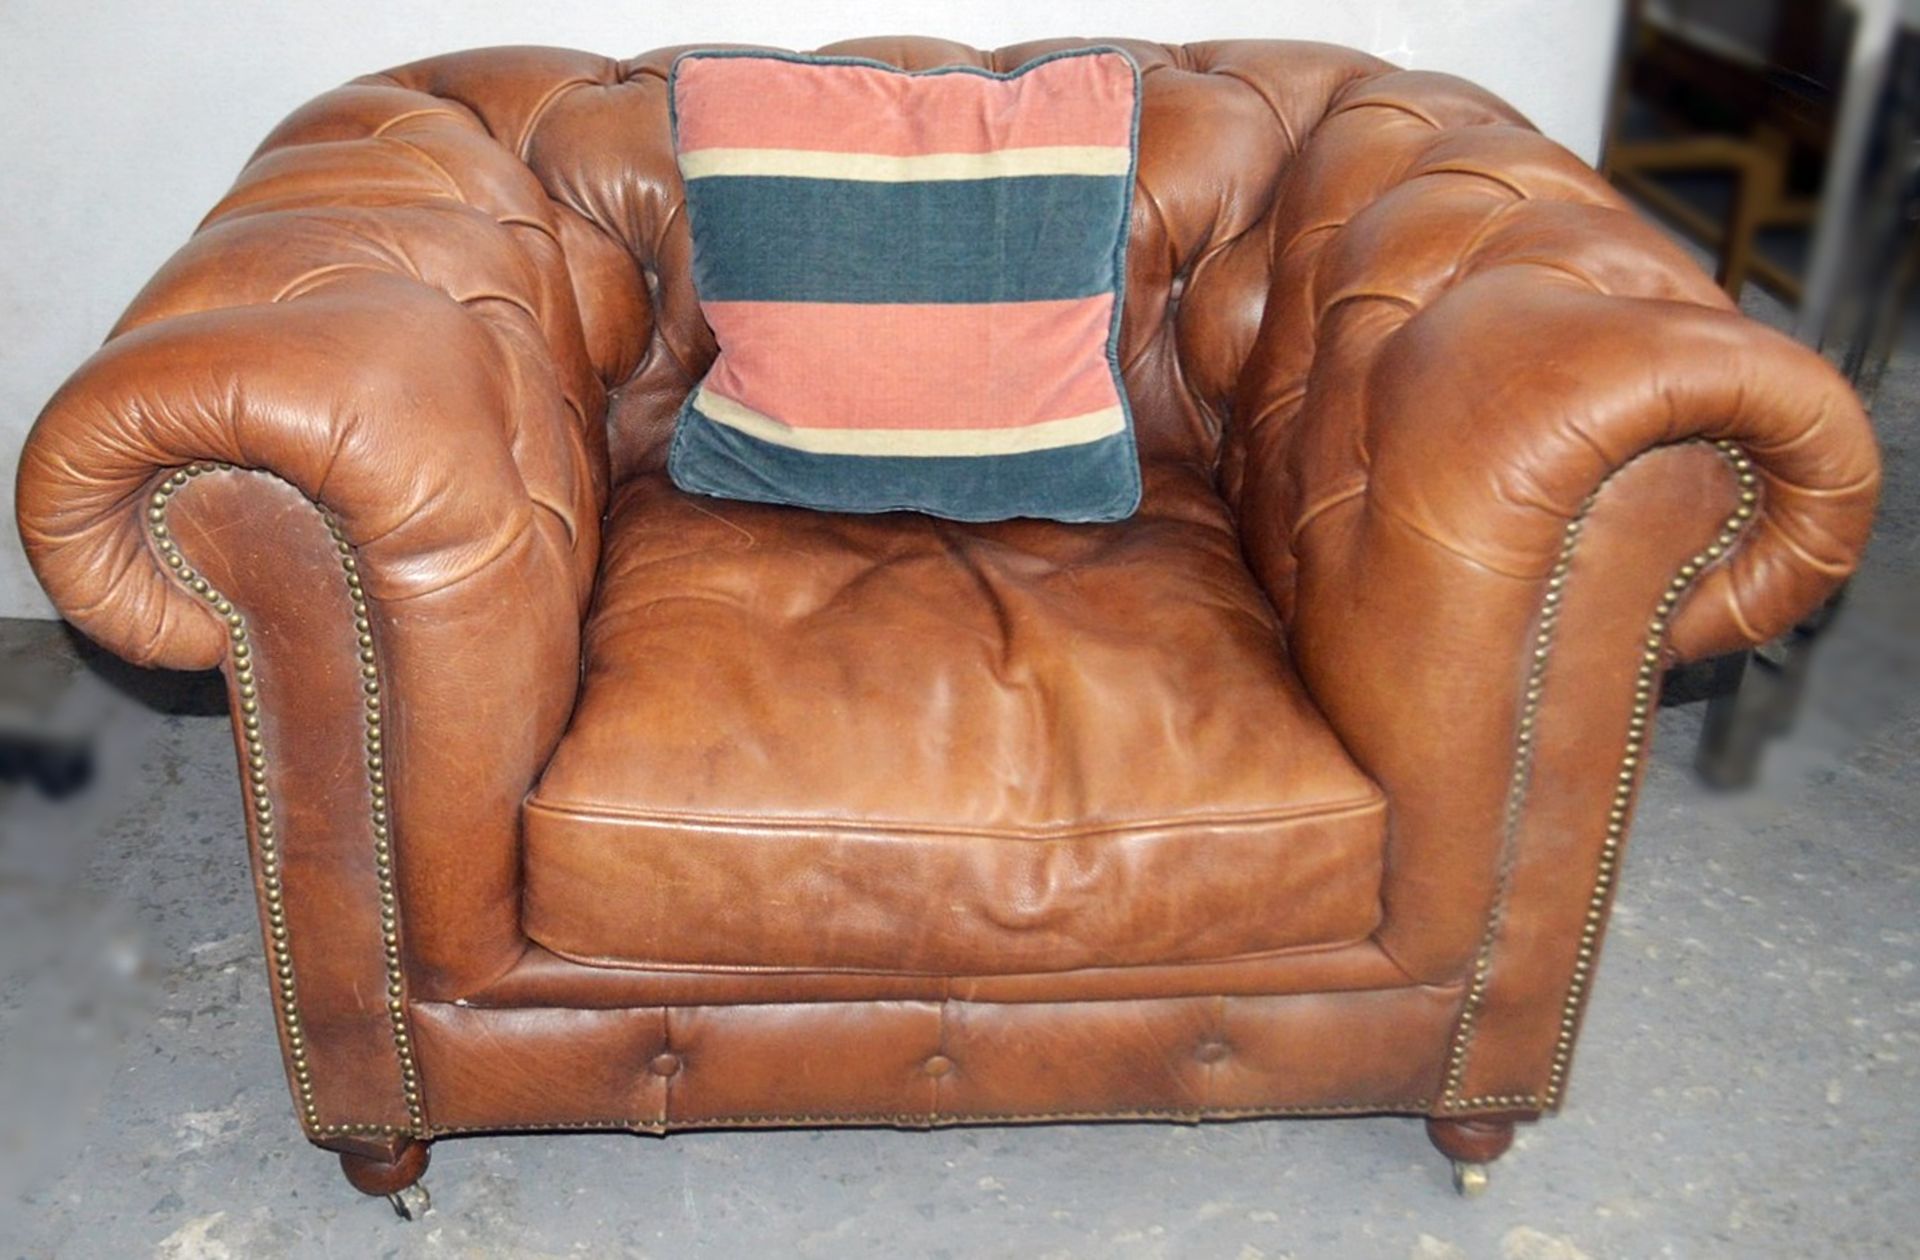 1 x Vintage-style Large Leather Chesterfield Armchair Featuring A Distressed Finish